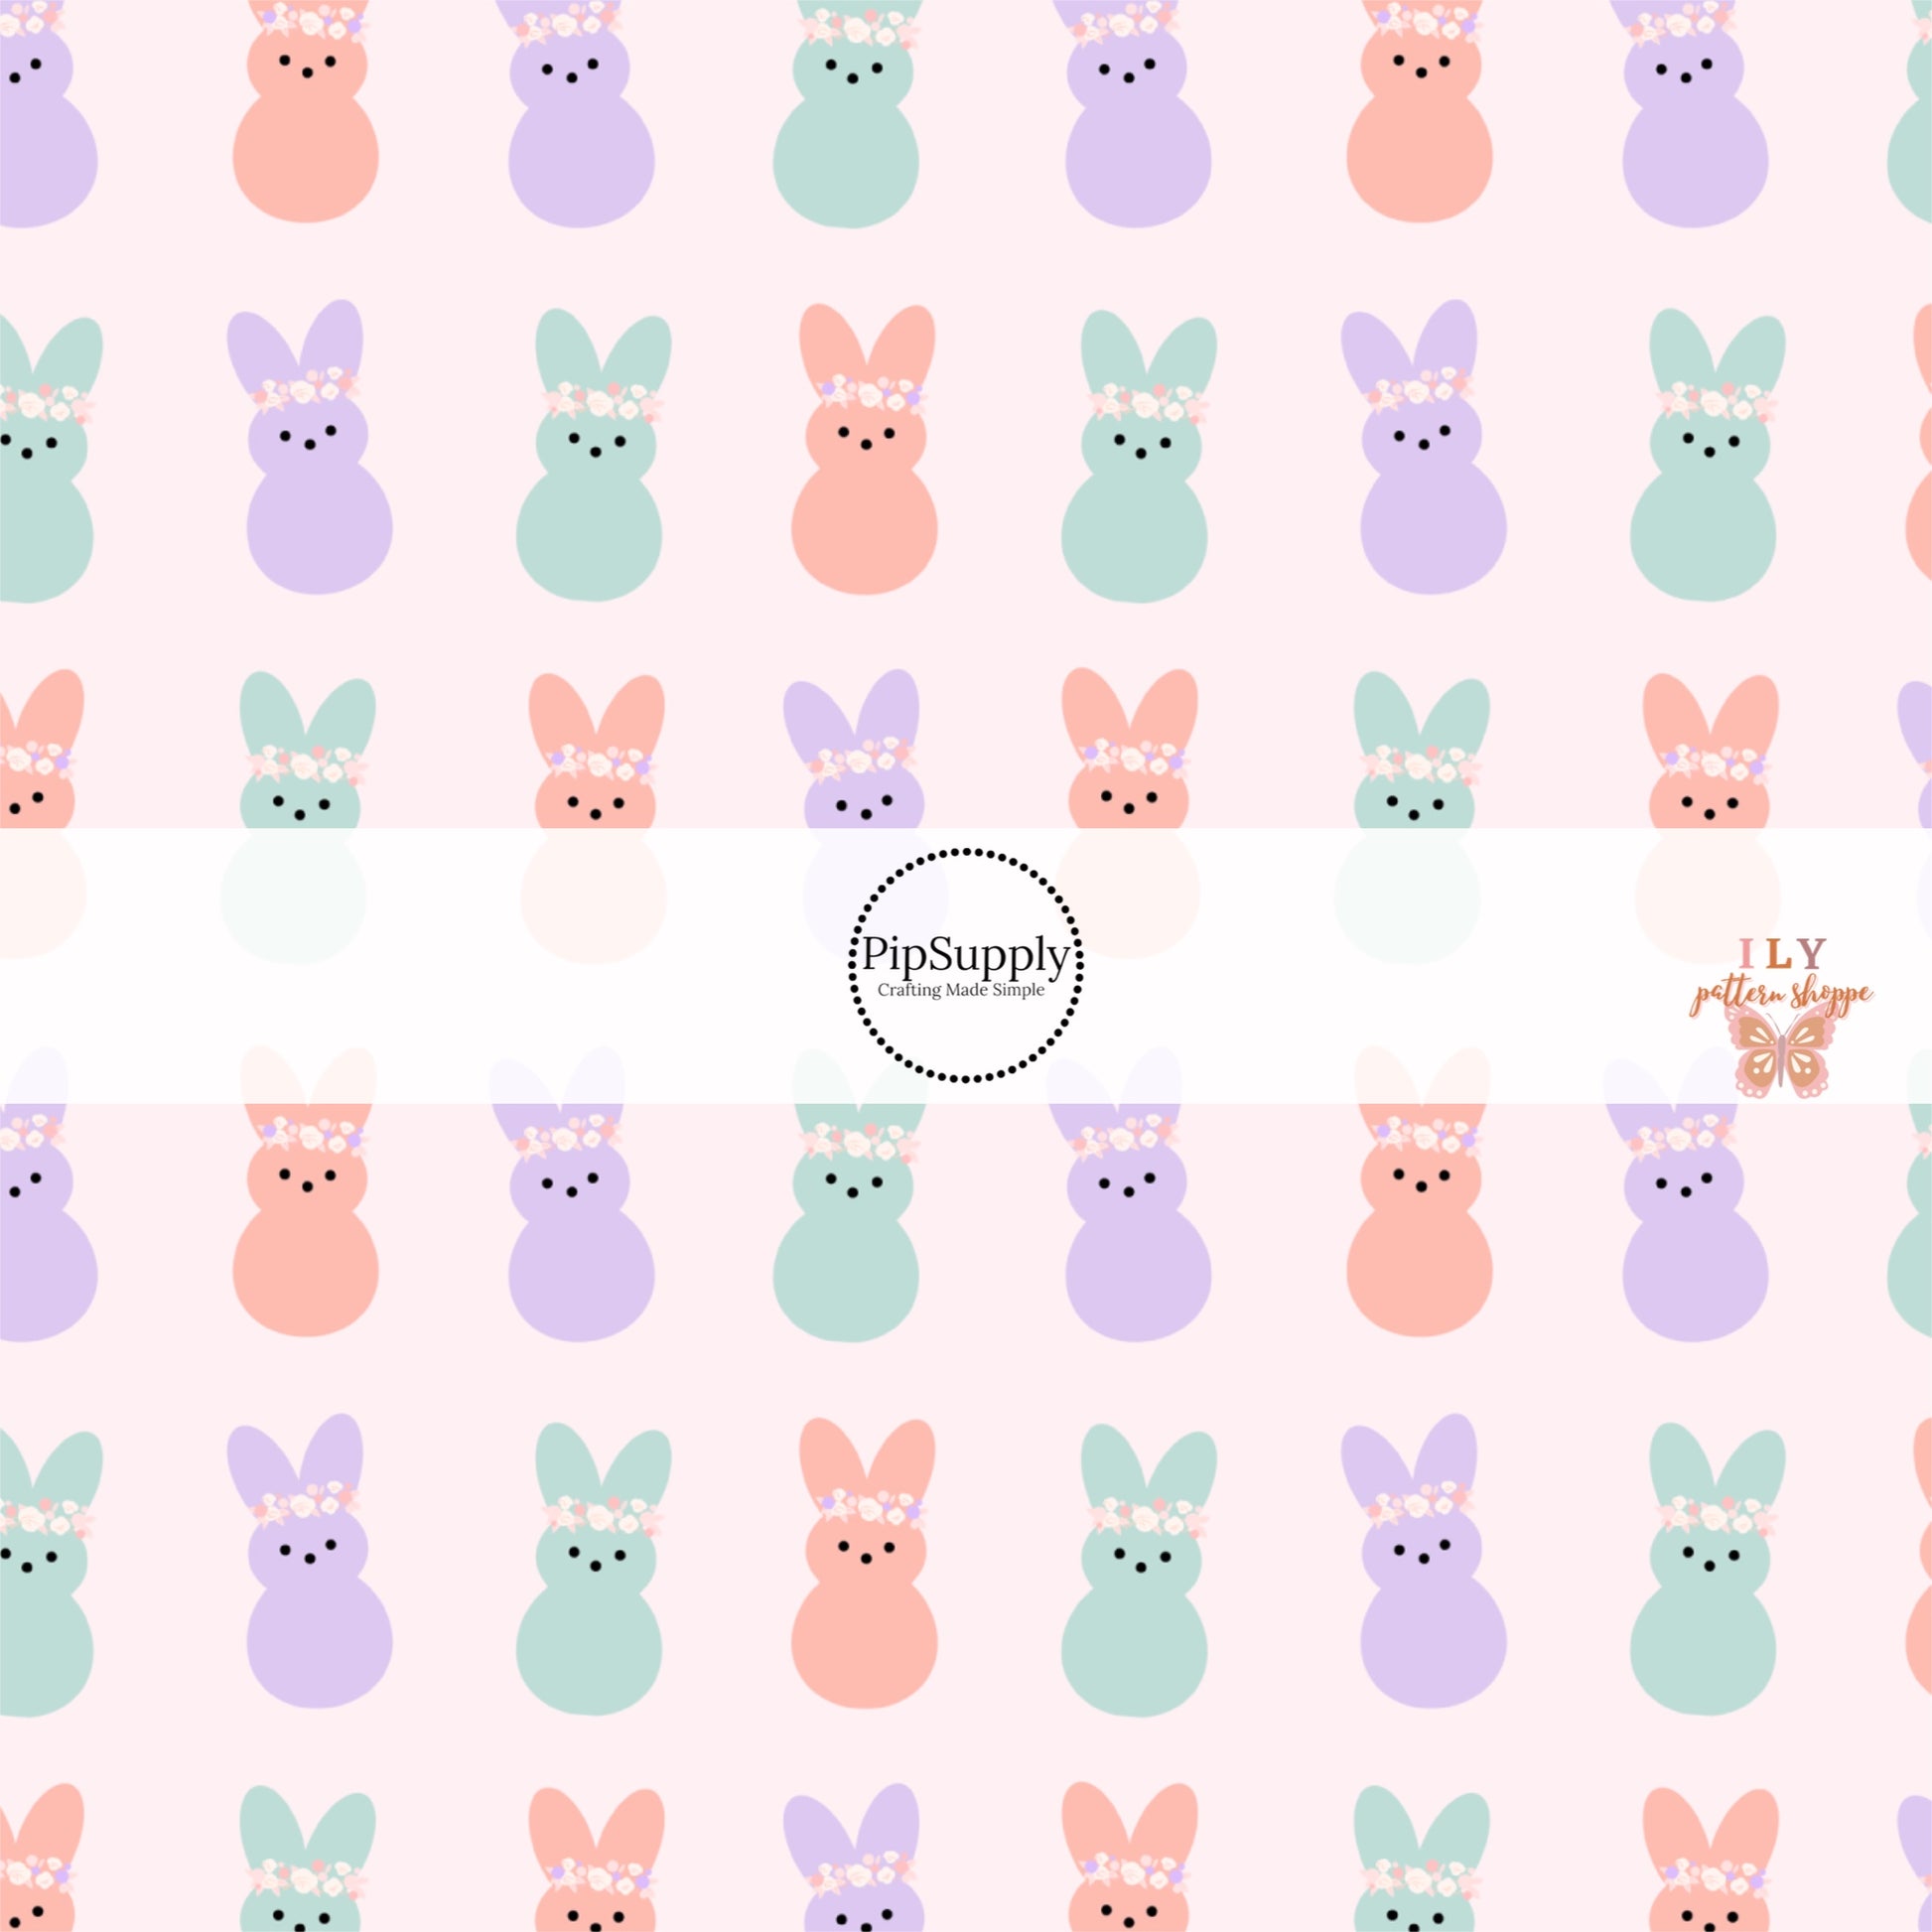 Floral crowns on purple, aqua, and pink bunnies on light pink bow strips